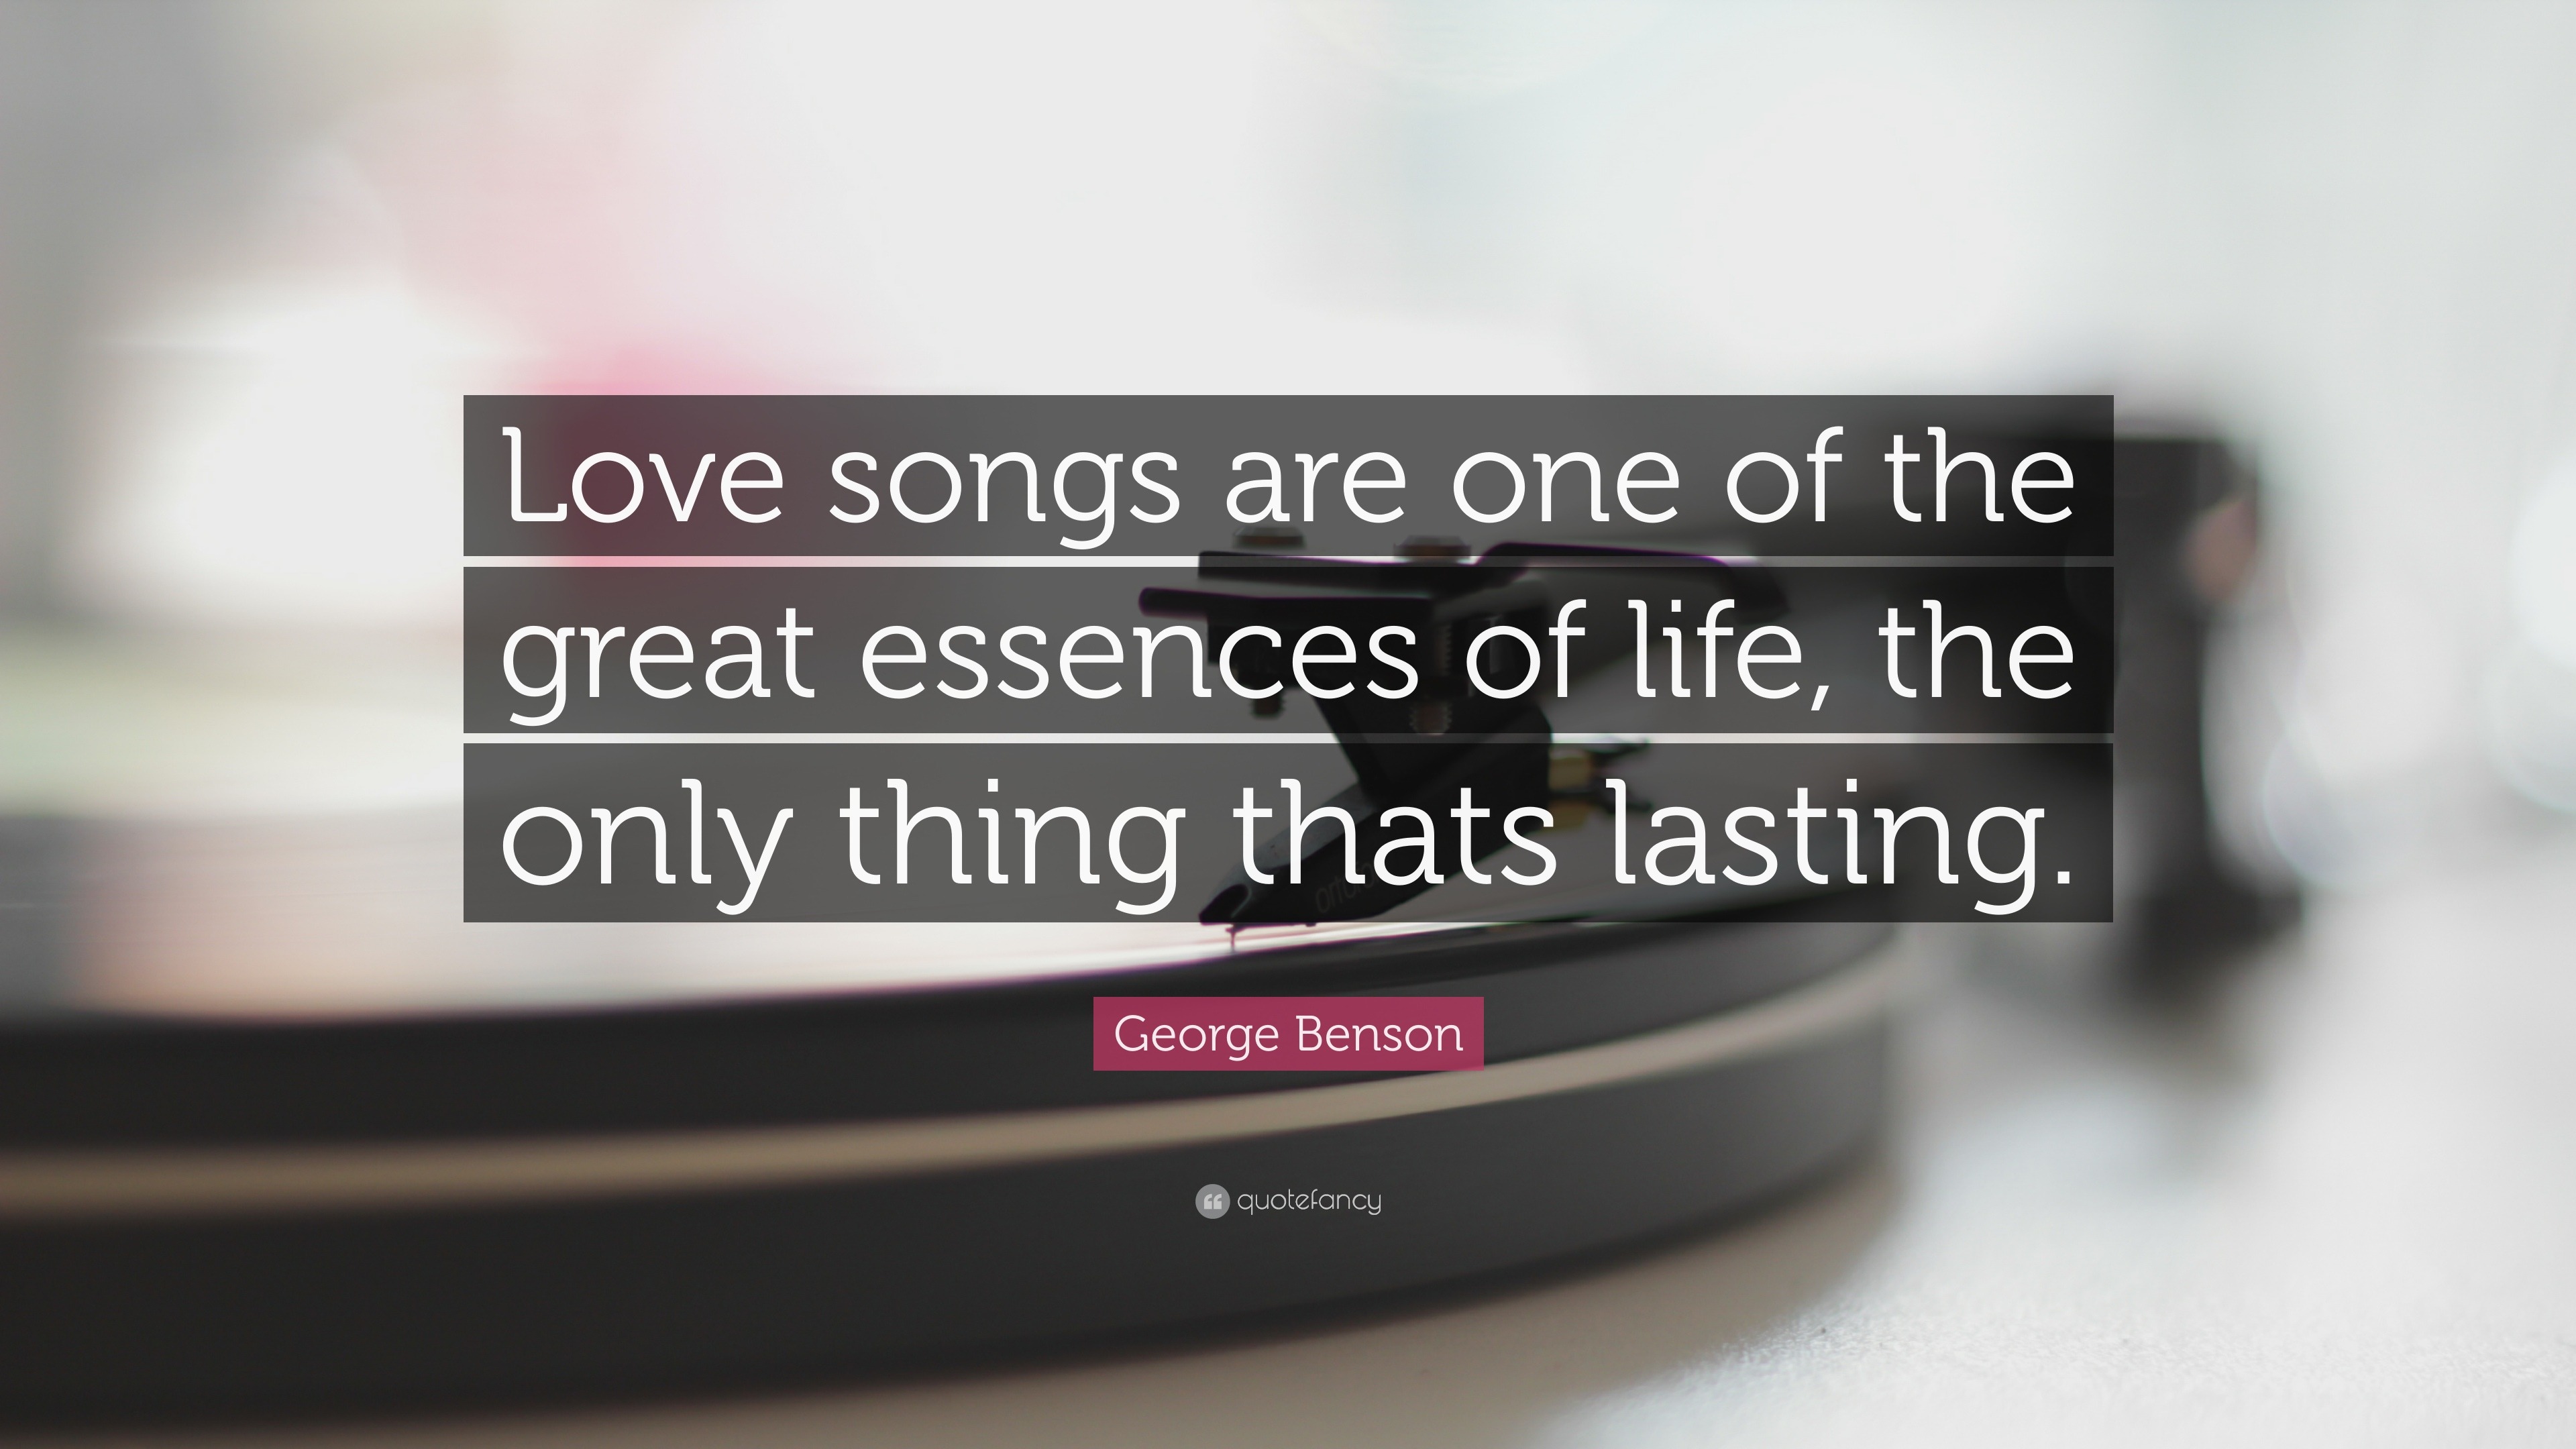 Love songs are one of the great essences of life, the only thing thats last...